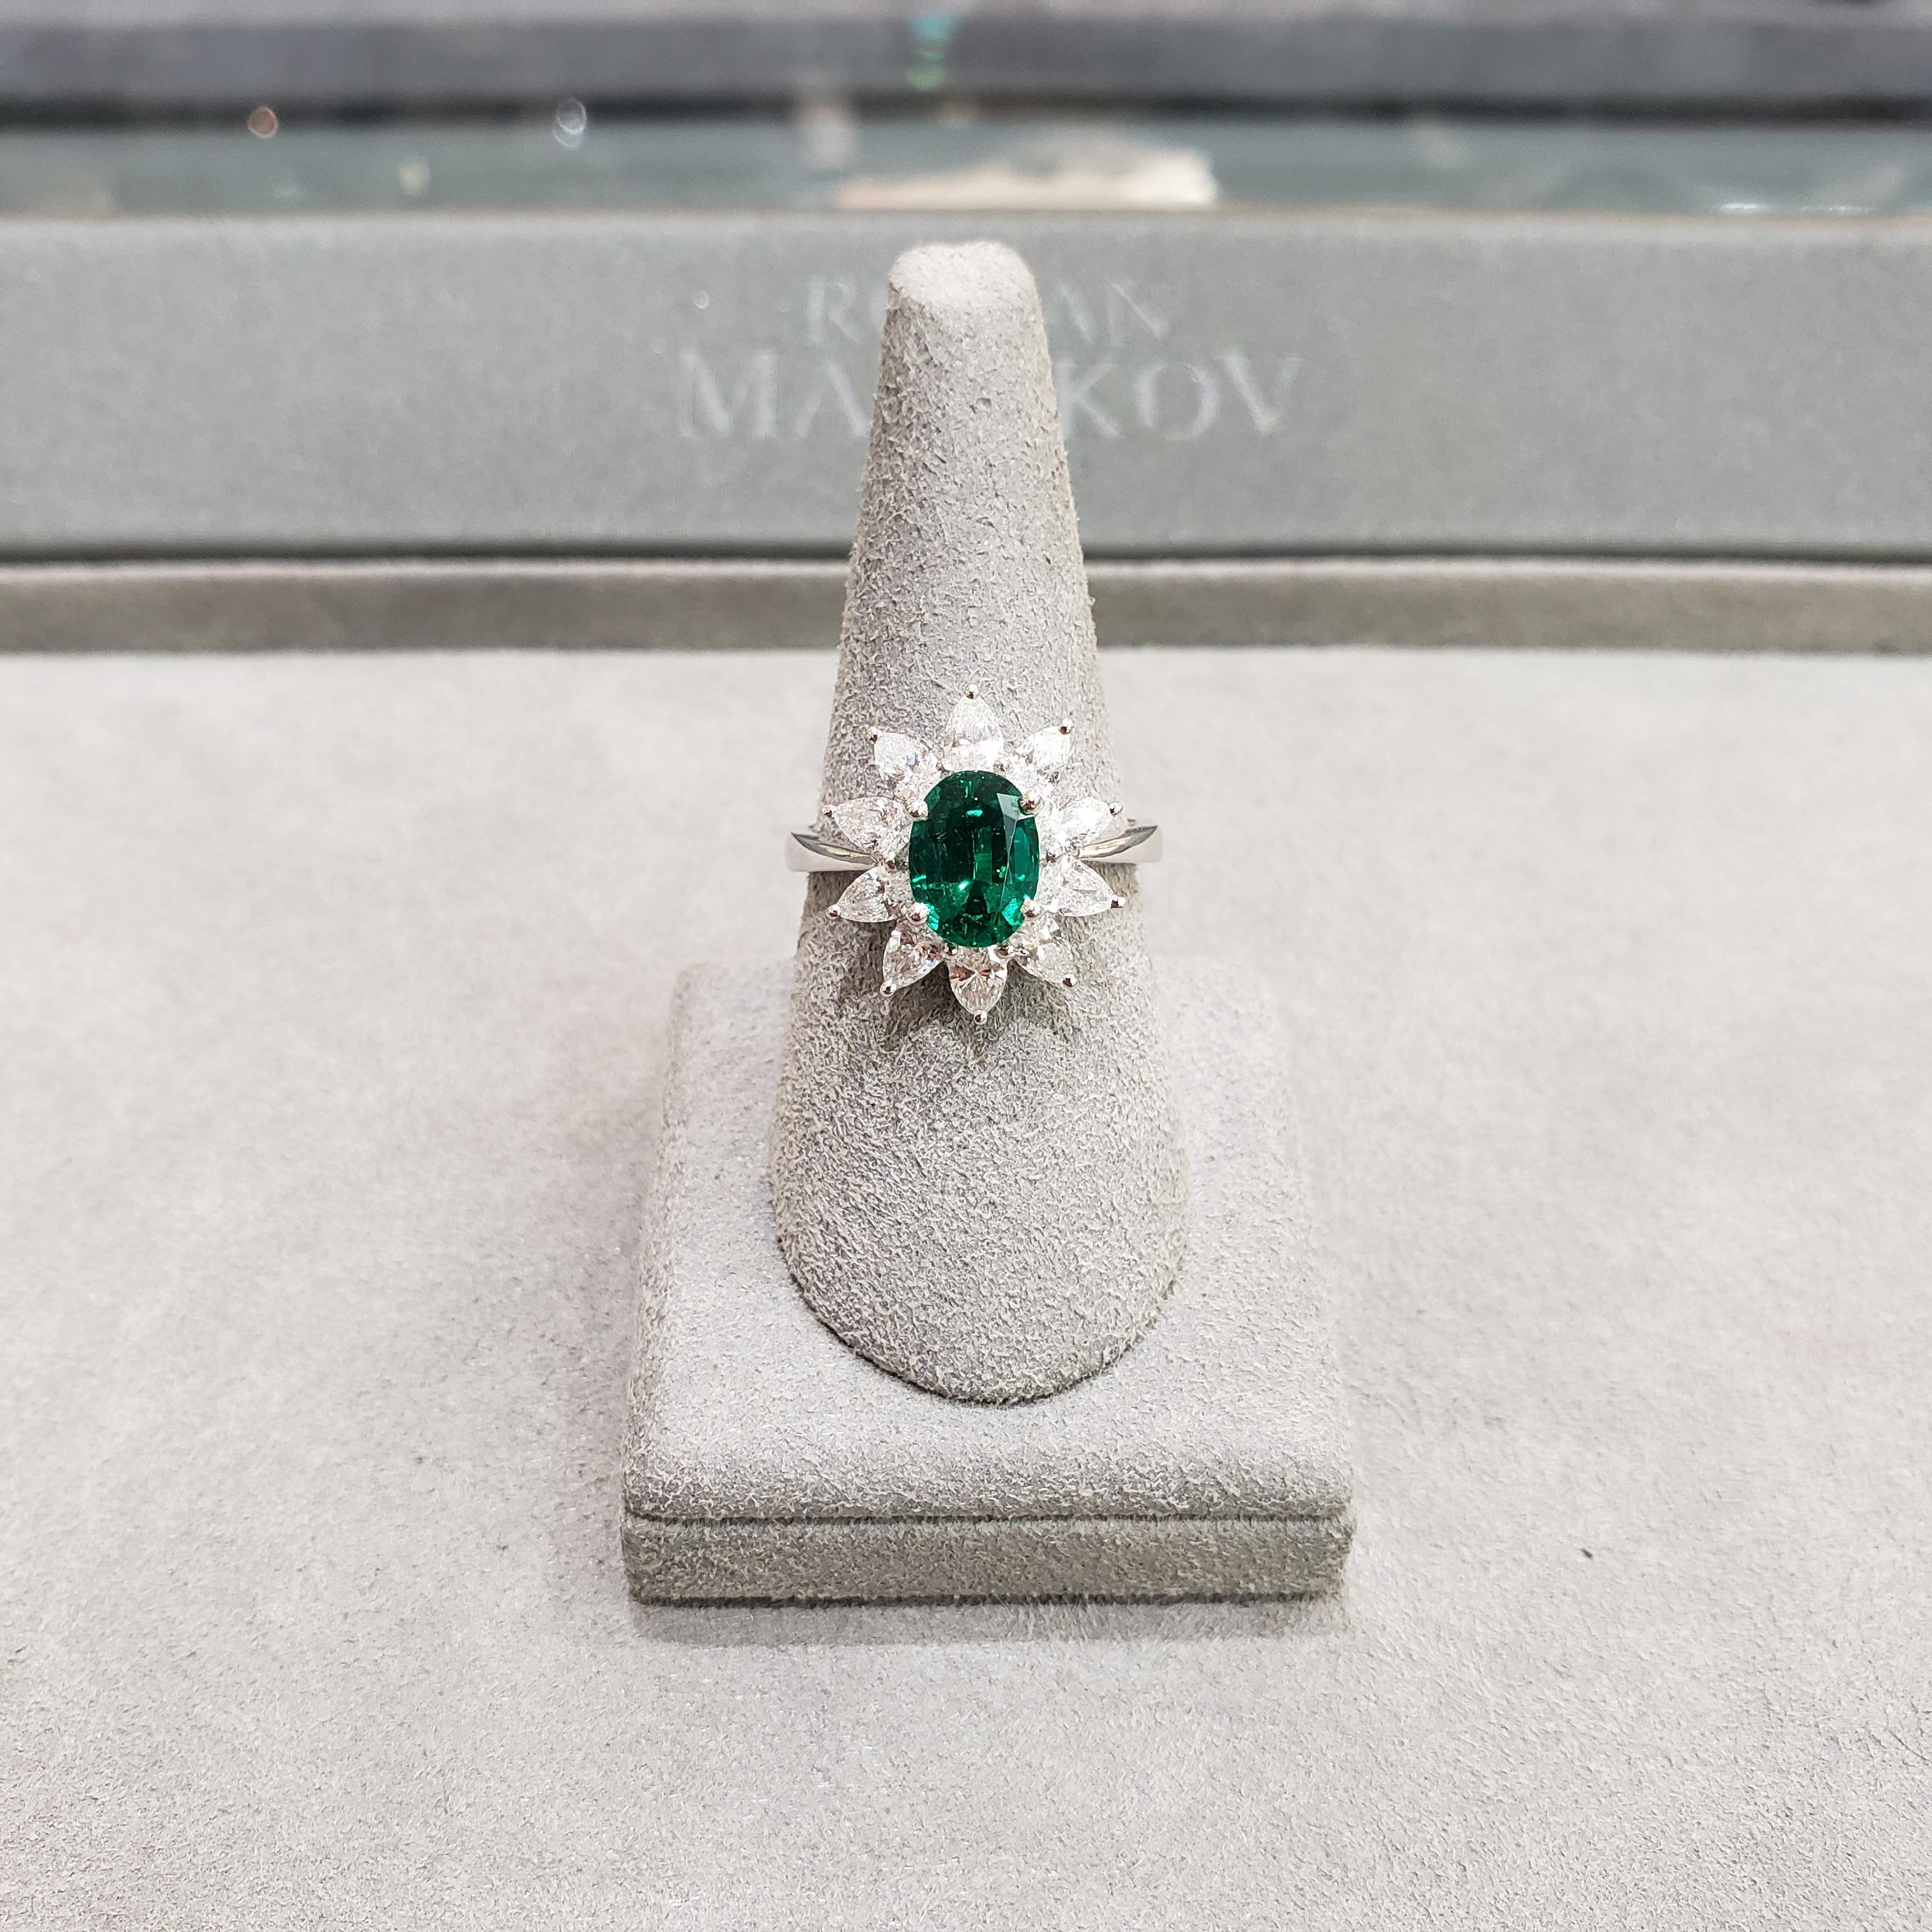 A stunning engagement ring showcasing color-rich 1.48 carats oval cut green emerald elegantly framed by 10 sparkling pear-shape diamonds in a floral motif style. Diamonds weigh 1.06 carats total. Mounted in solid 18K white gold. Size 6.5 US and